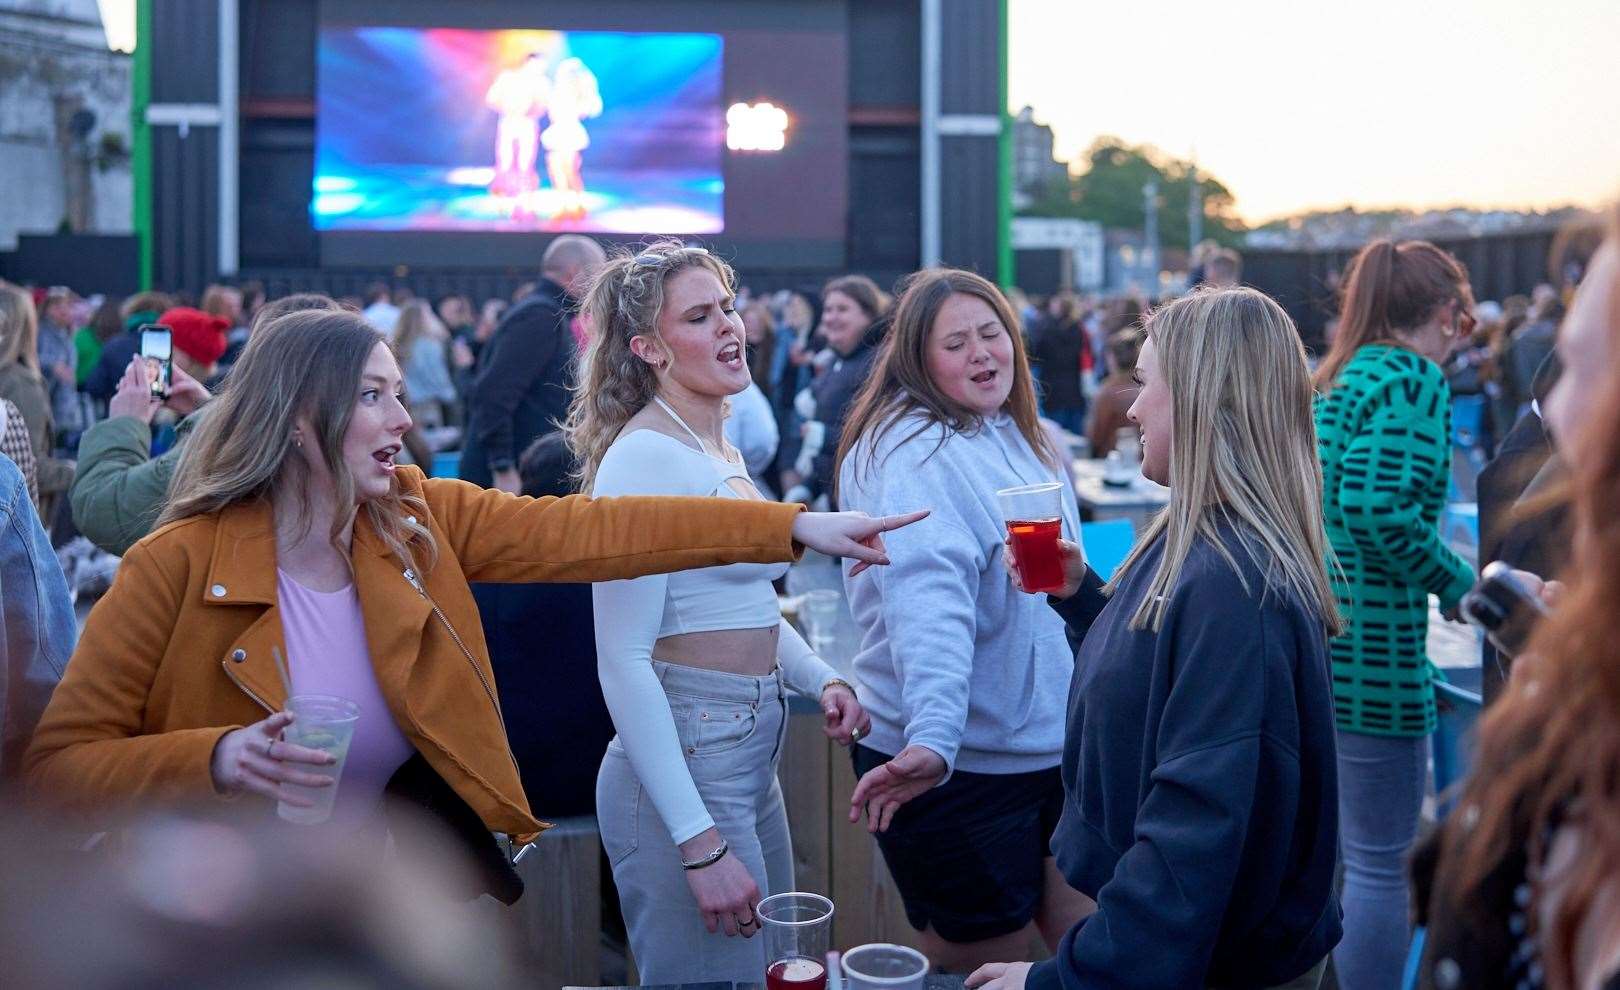 The big screen returns to Folkestone’s Harbour Arm, with films like Grease, Mamma Mia and Barbie lined up for the summer. Picture: Supplied by Sharp Relations